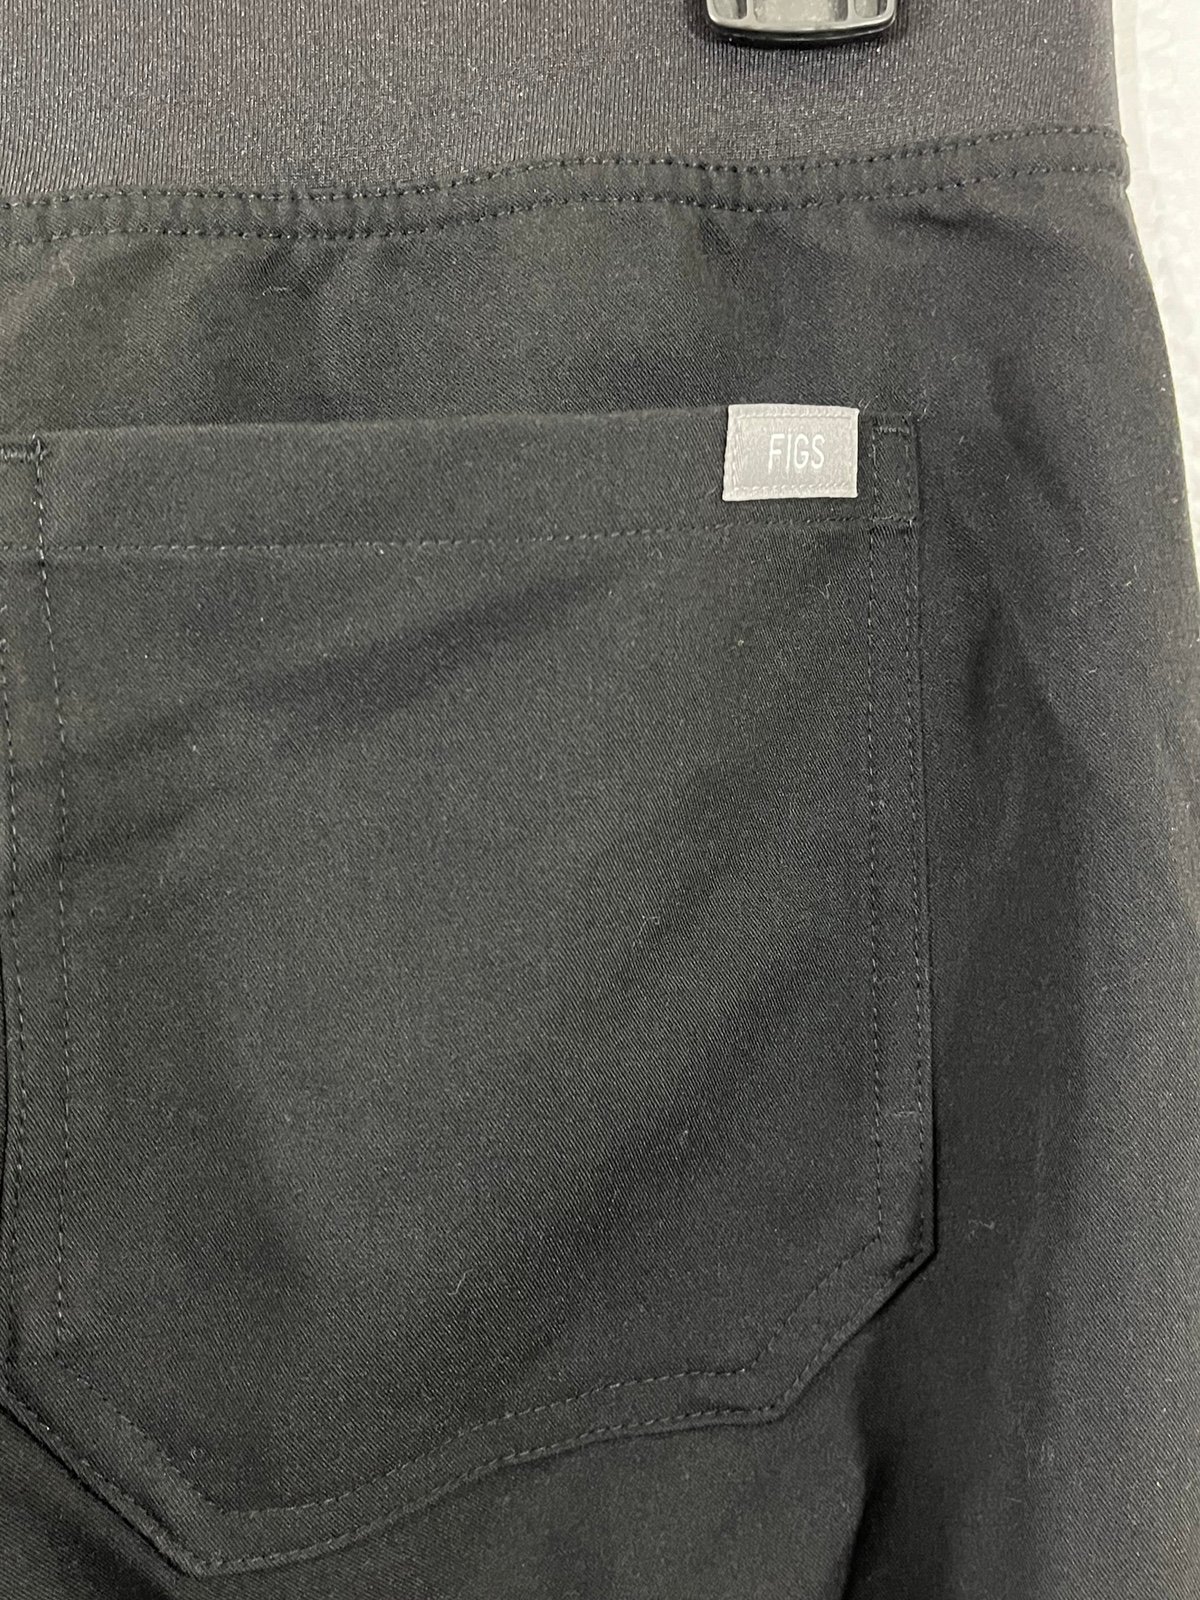 Affordable Figs Technical Collection Livingston Basic Scrub Pants Black Size XS NWT KWKDfuelf Cheap